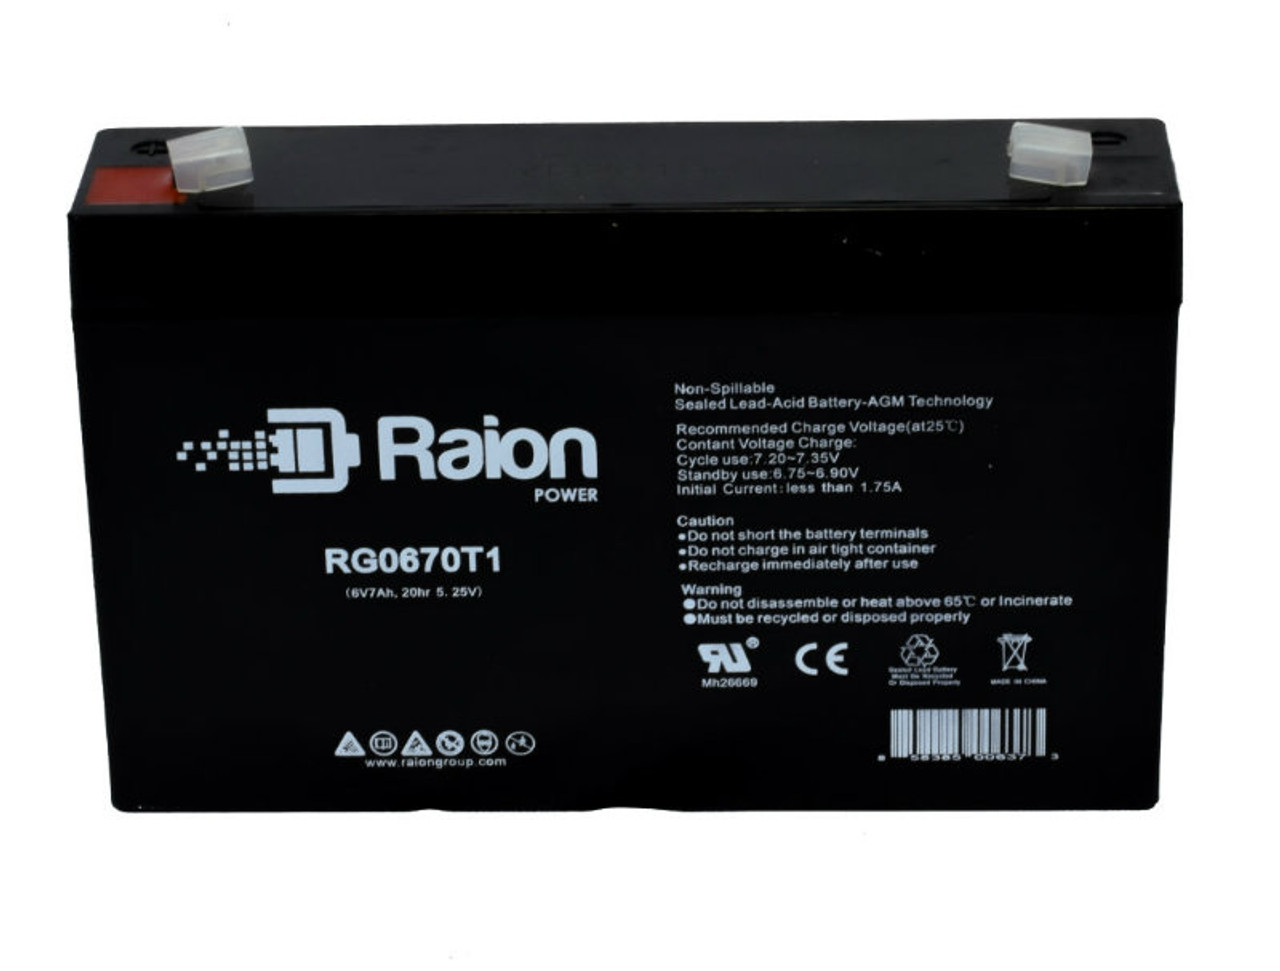 Raion Power RG0670T1 Replacement Battery Cartridge for Power Source WP7-6 (91-050)